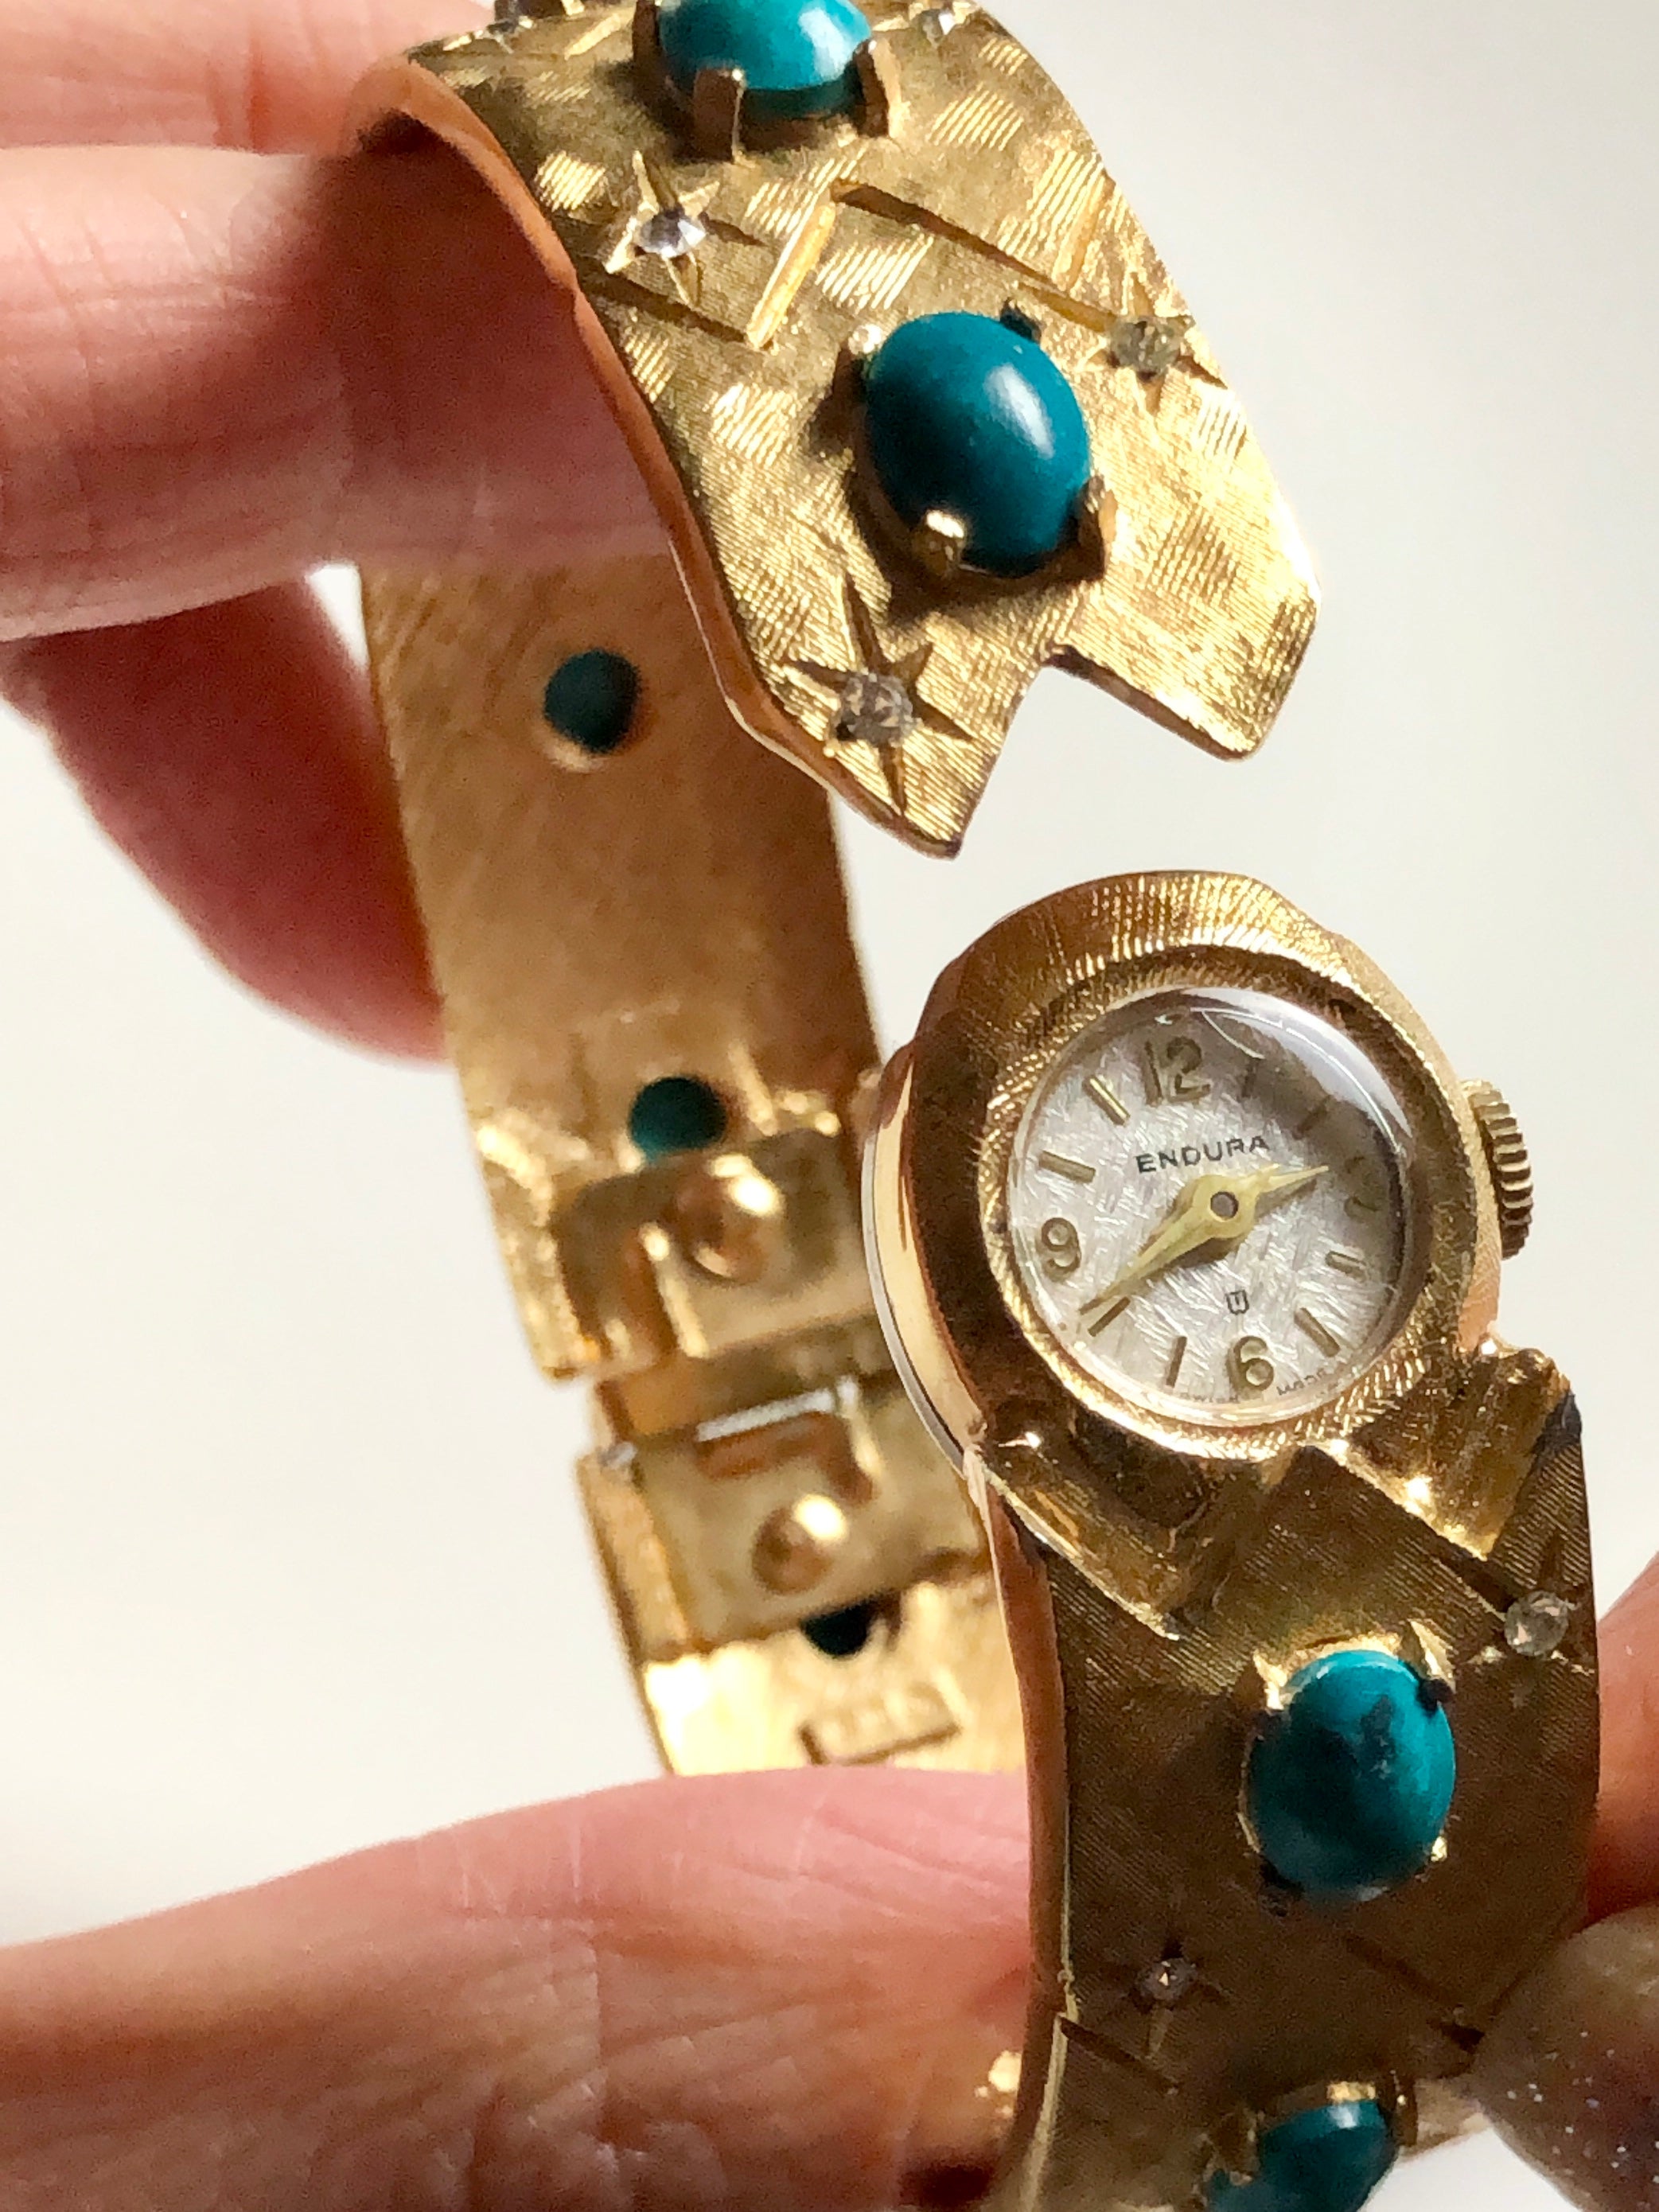 Endura Oval Turquoise Sparkled Crystal Gold Ladies Wrist Watch